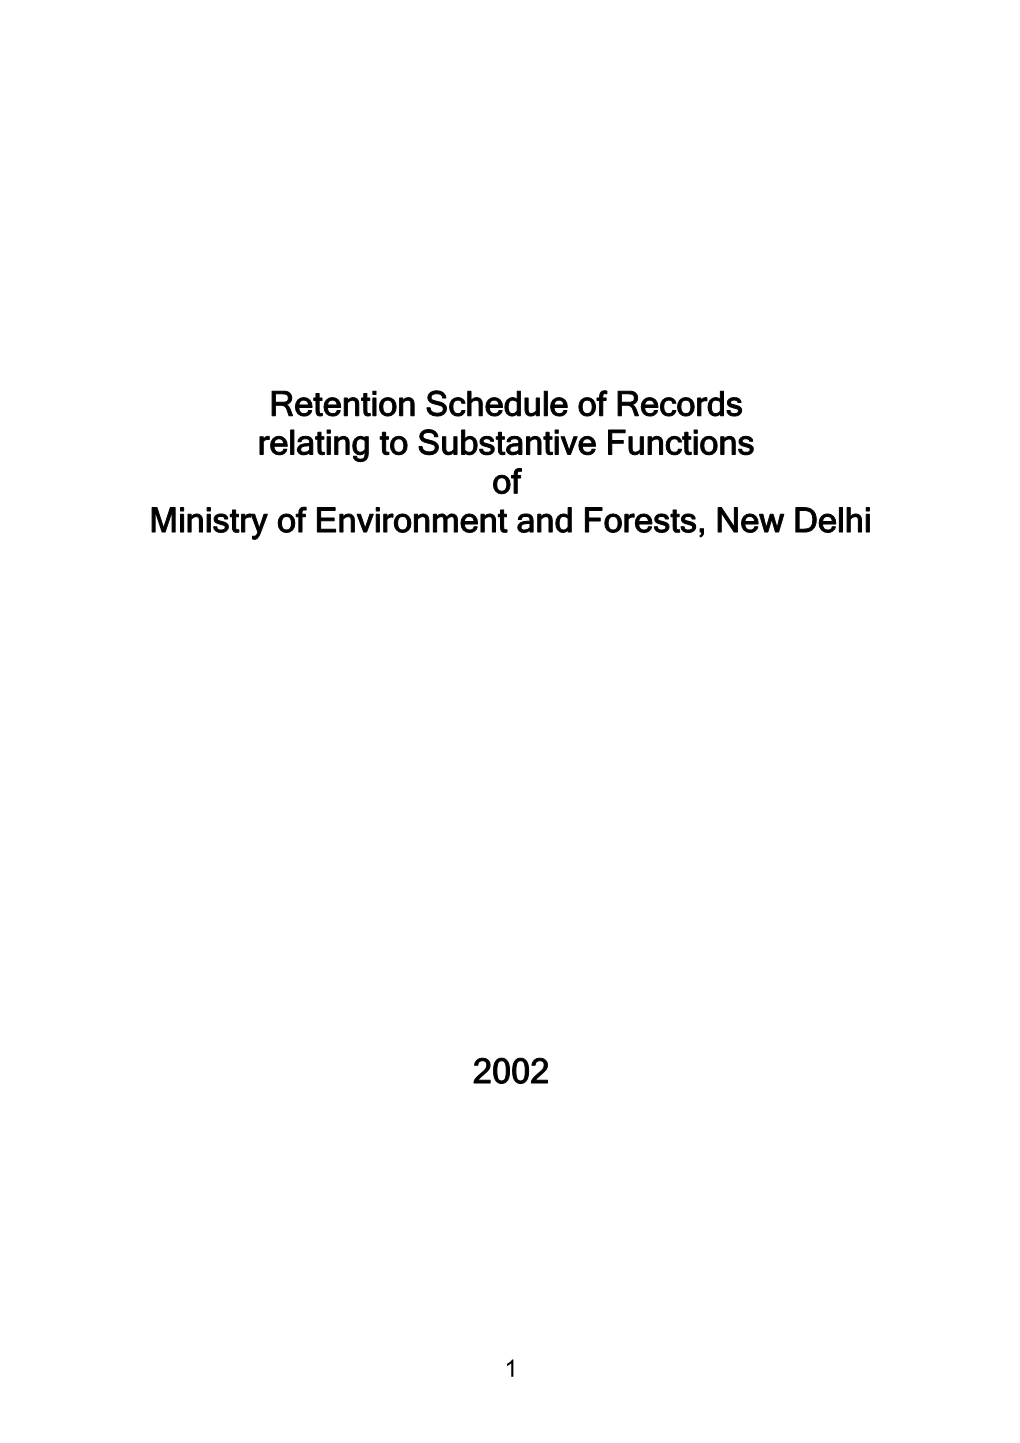 Ministry of Environment and Forests, New Delhi